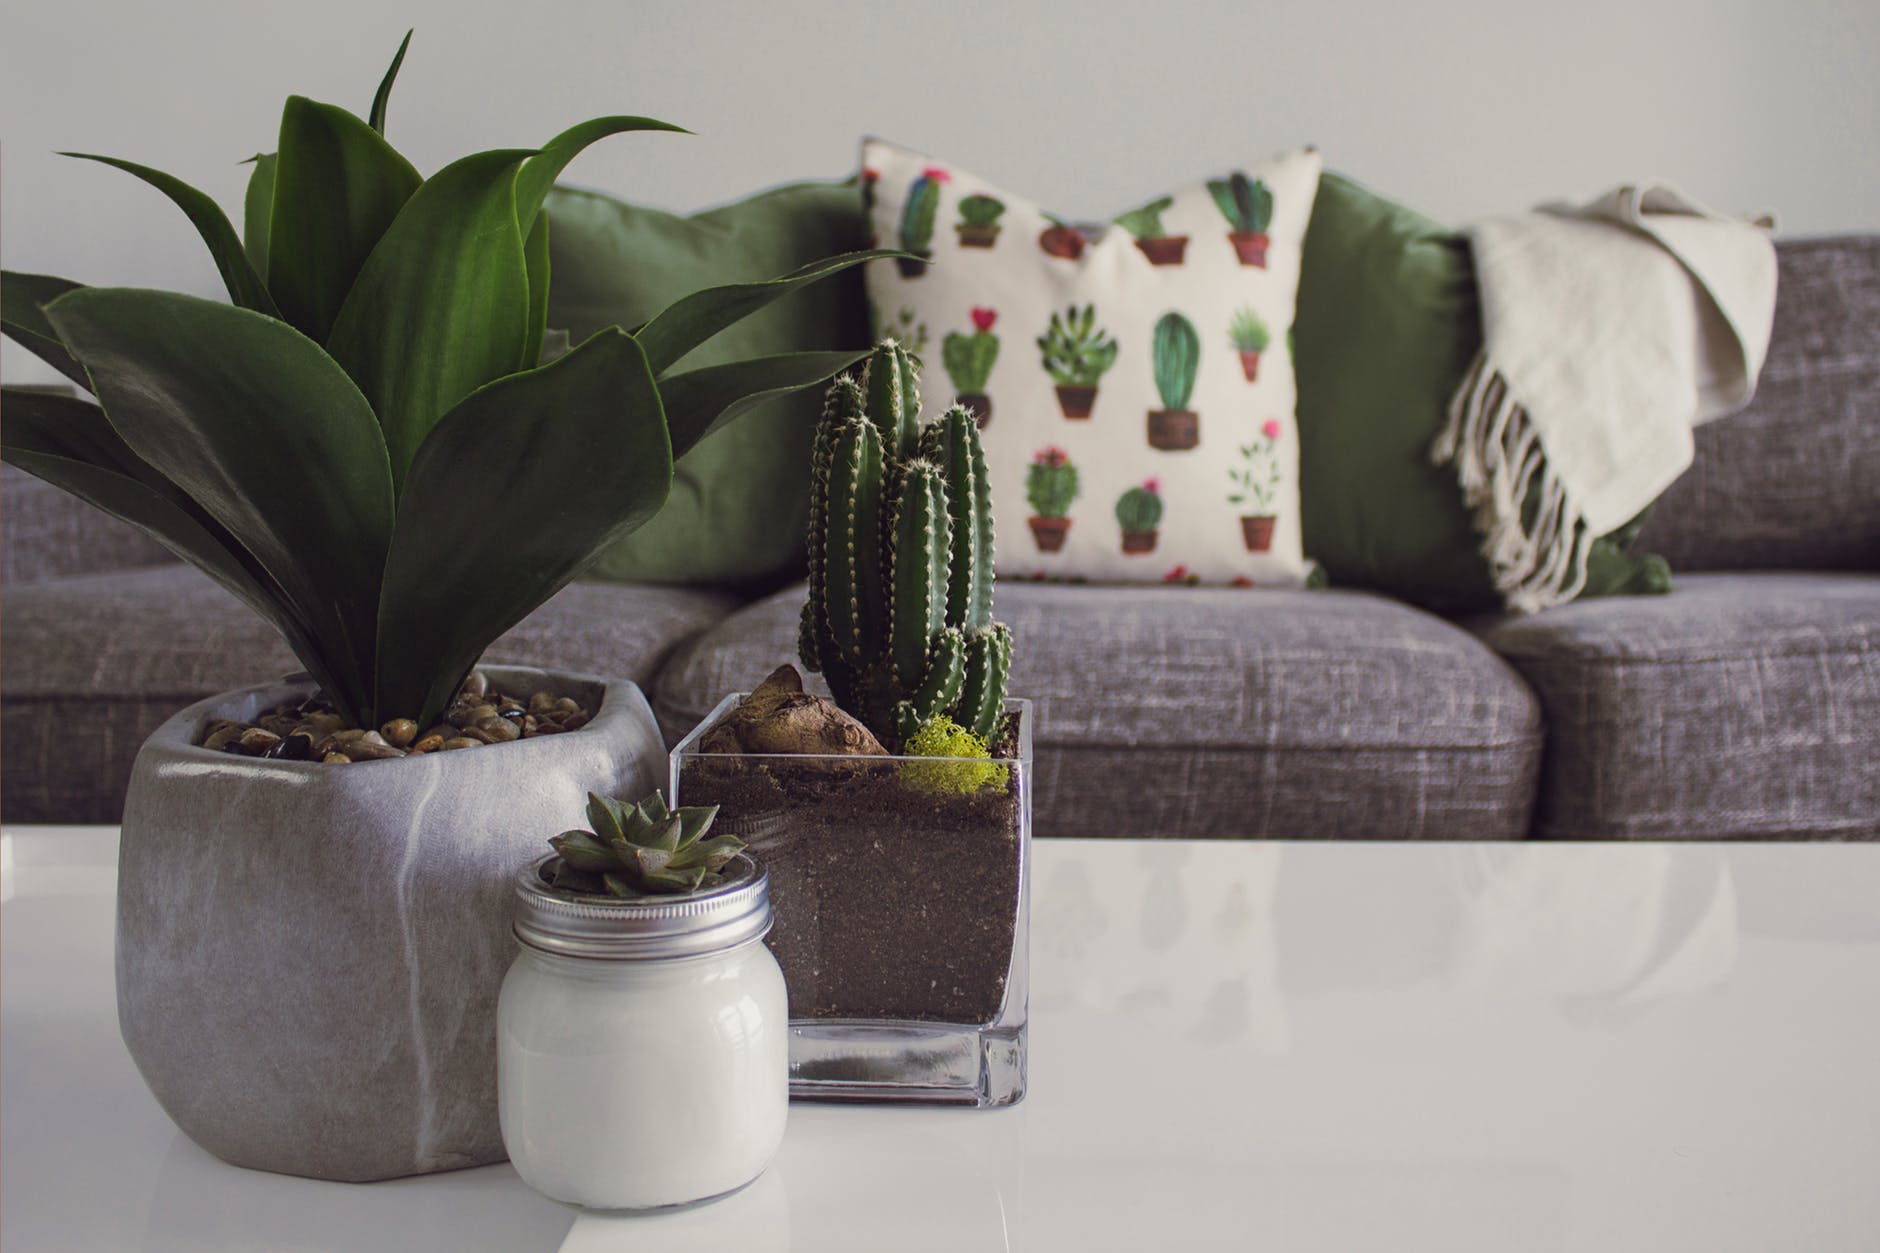 How to start a home decor business